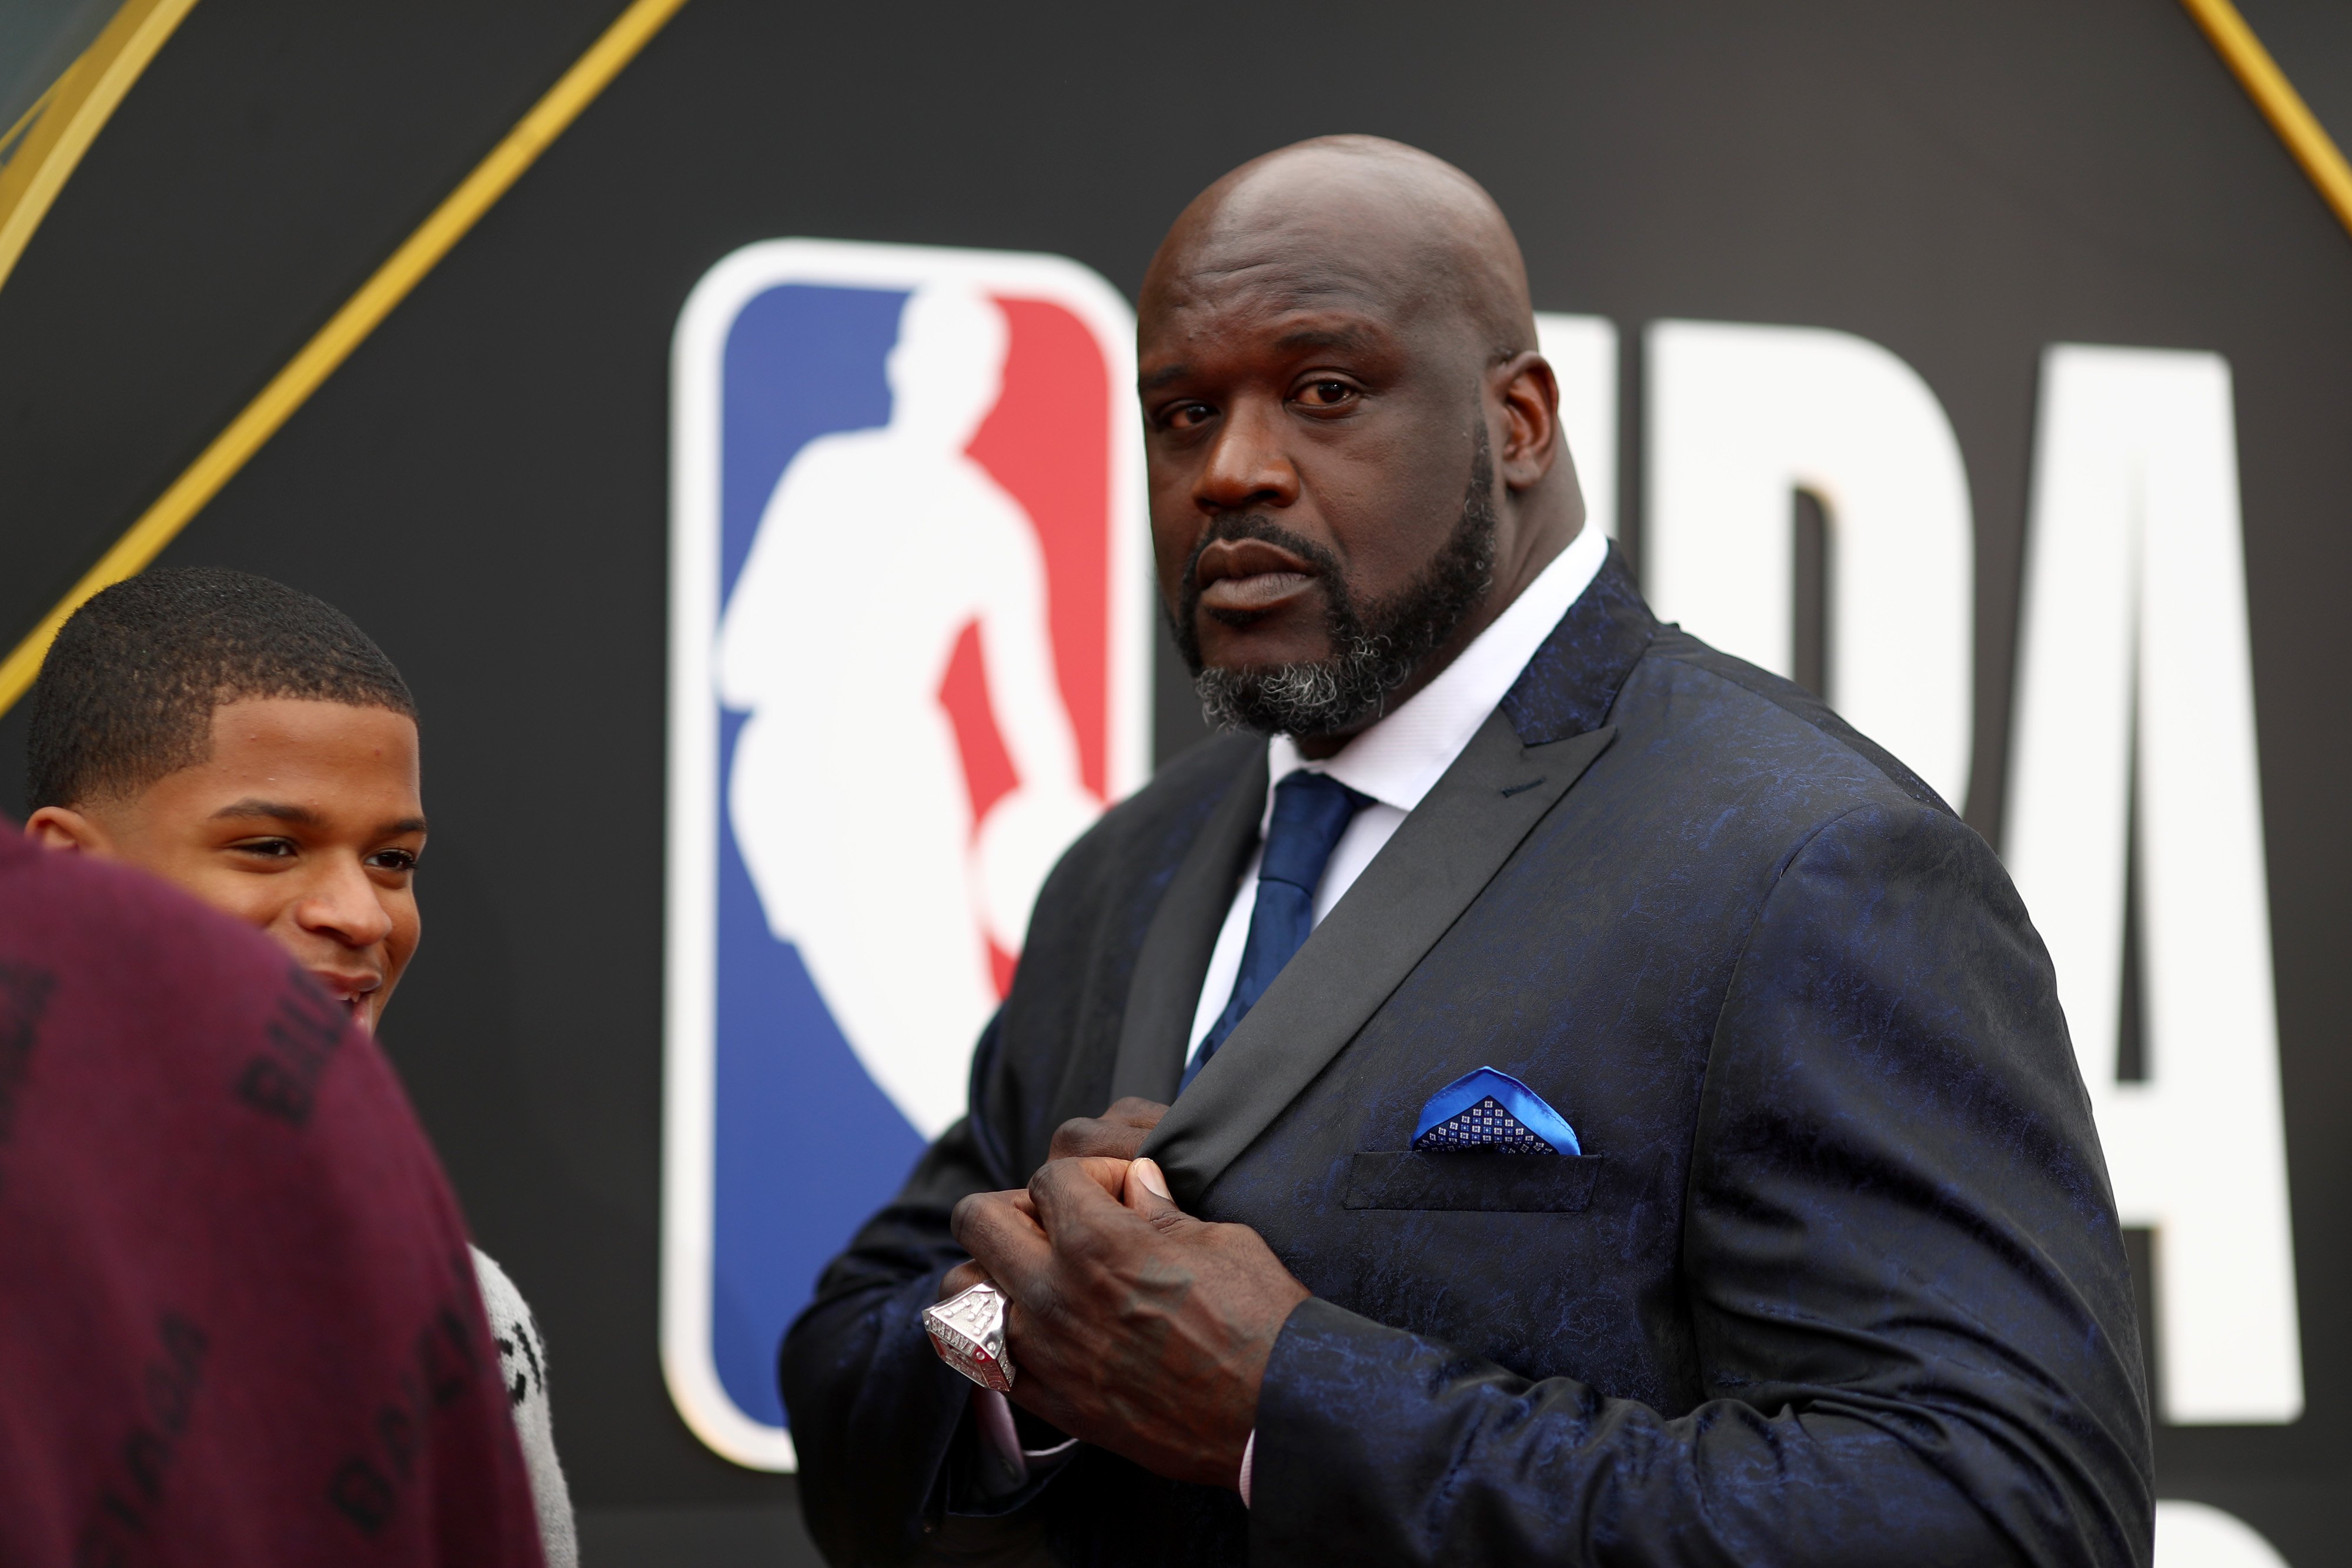 Shaquille O'Neal attends the 2019 NBA Awards presented by Kia on TNT at Barker Hangar on June 24, 2019 | Photo: GettyImages